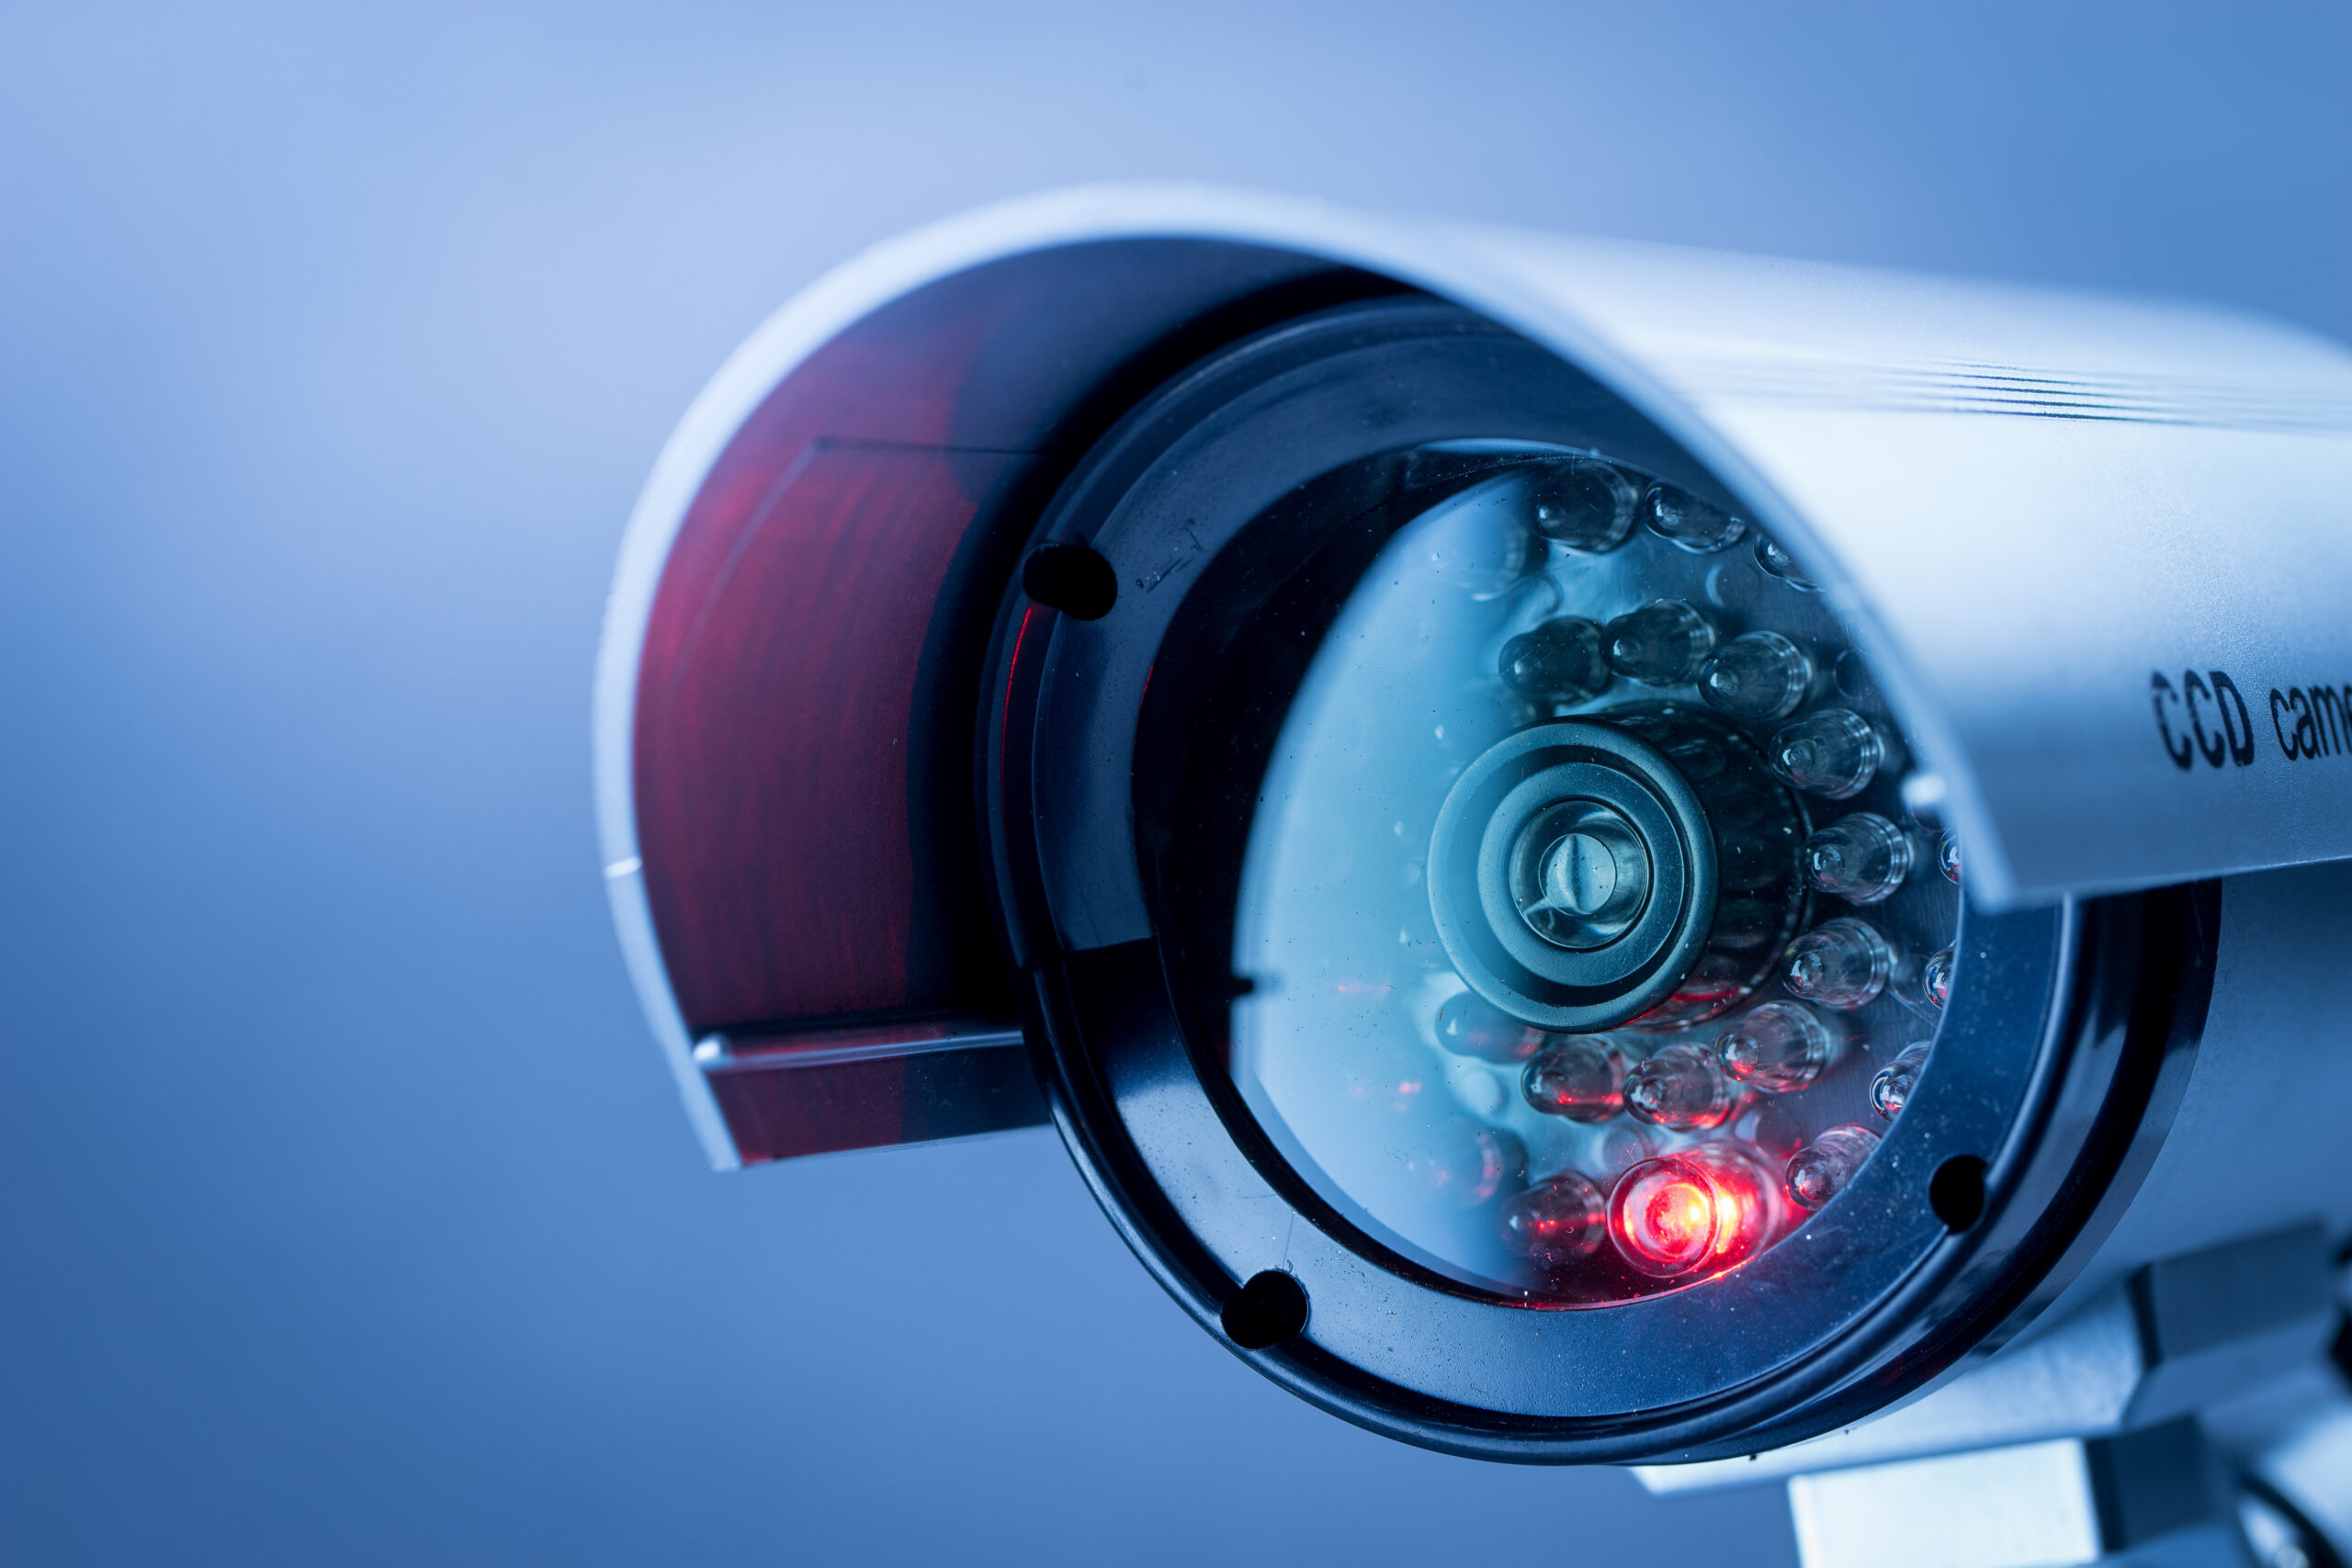 Security Systems For Home And Business